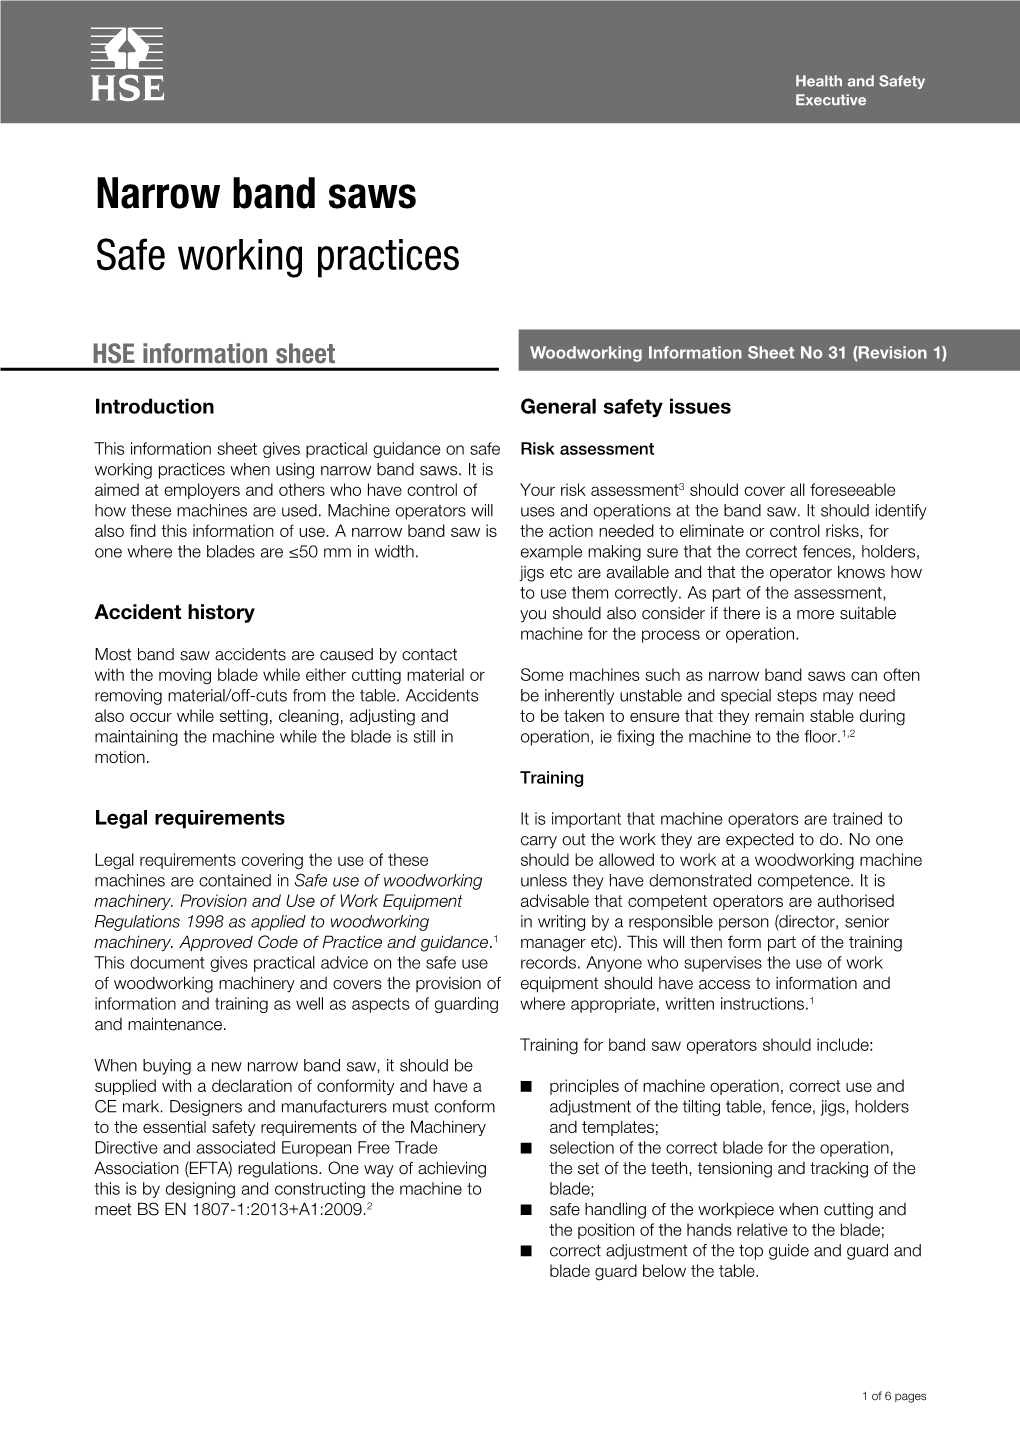 Narrow Band Saws: Safe Working Practices WIS31